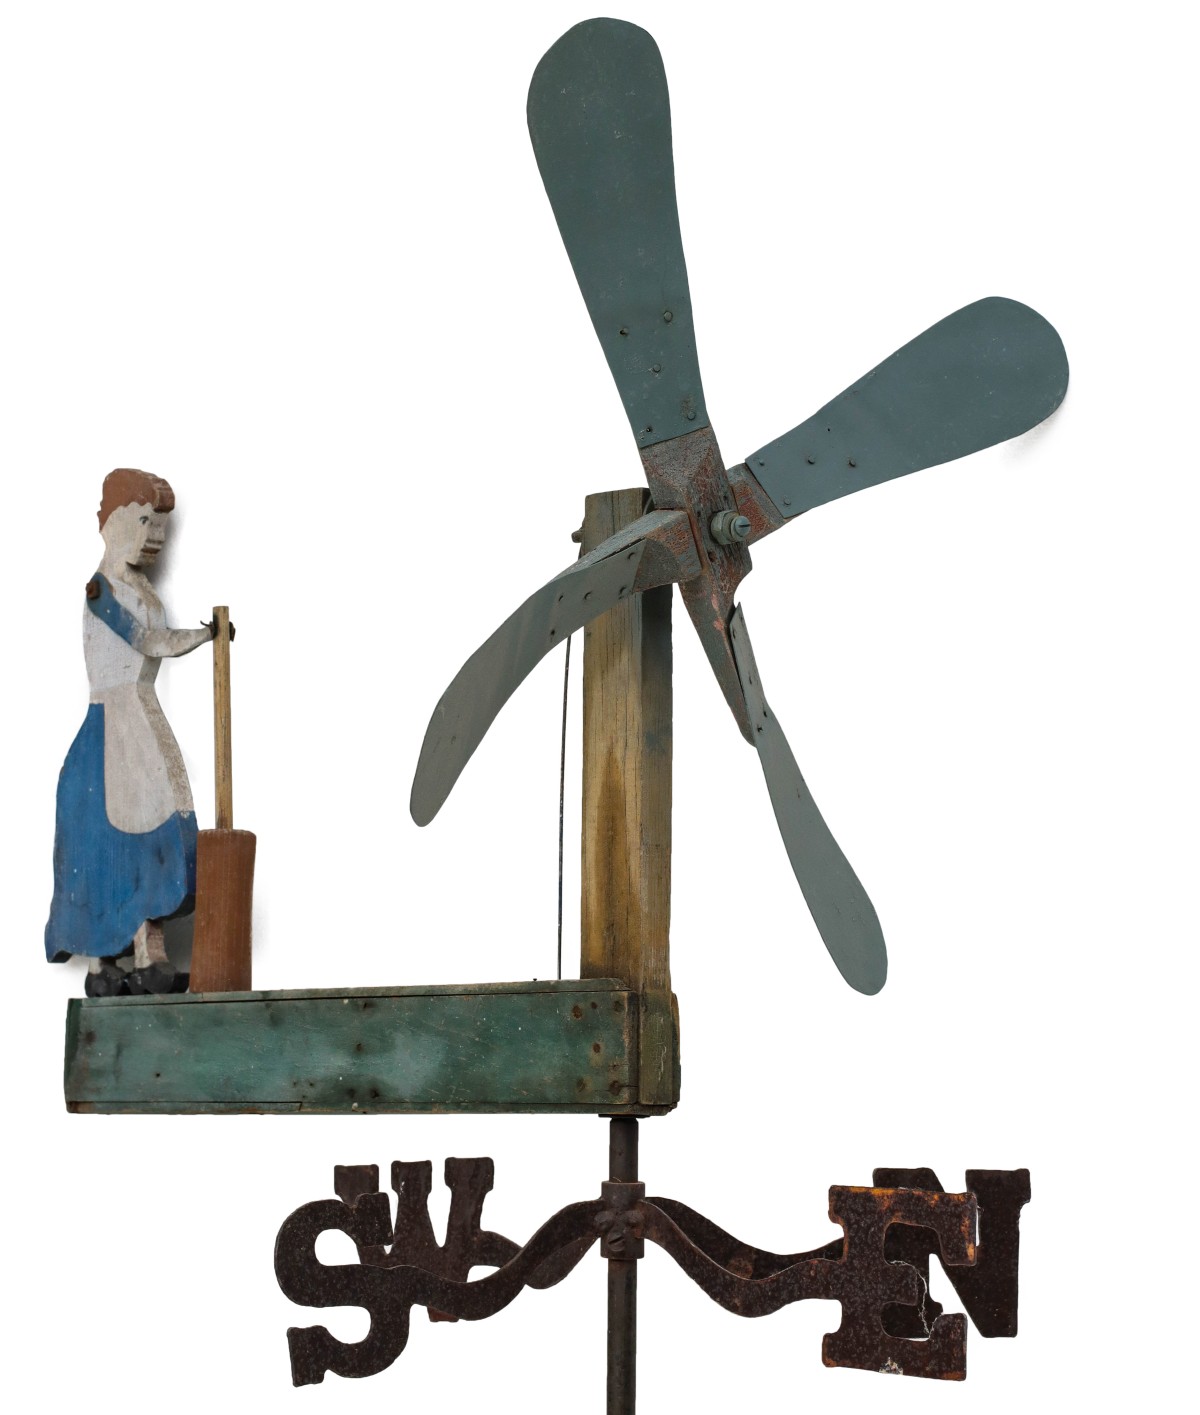 A FOLK ART WHIRLIGIG WITH CHURNING BUTTER PIONEER